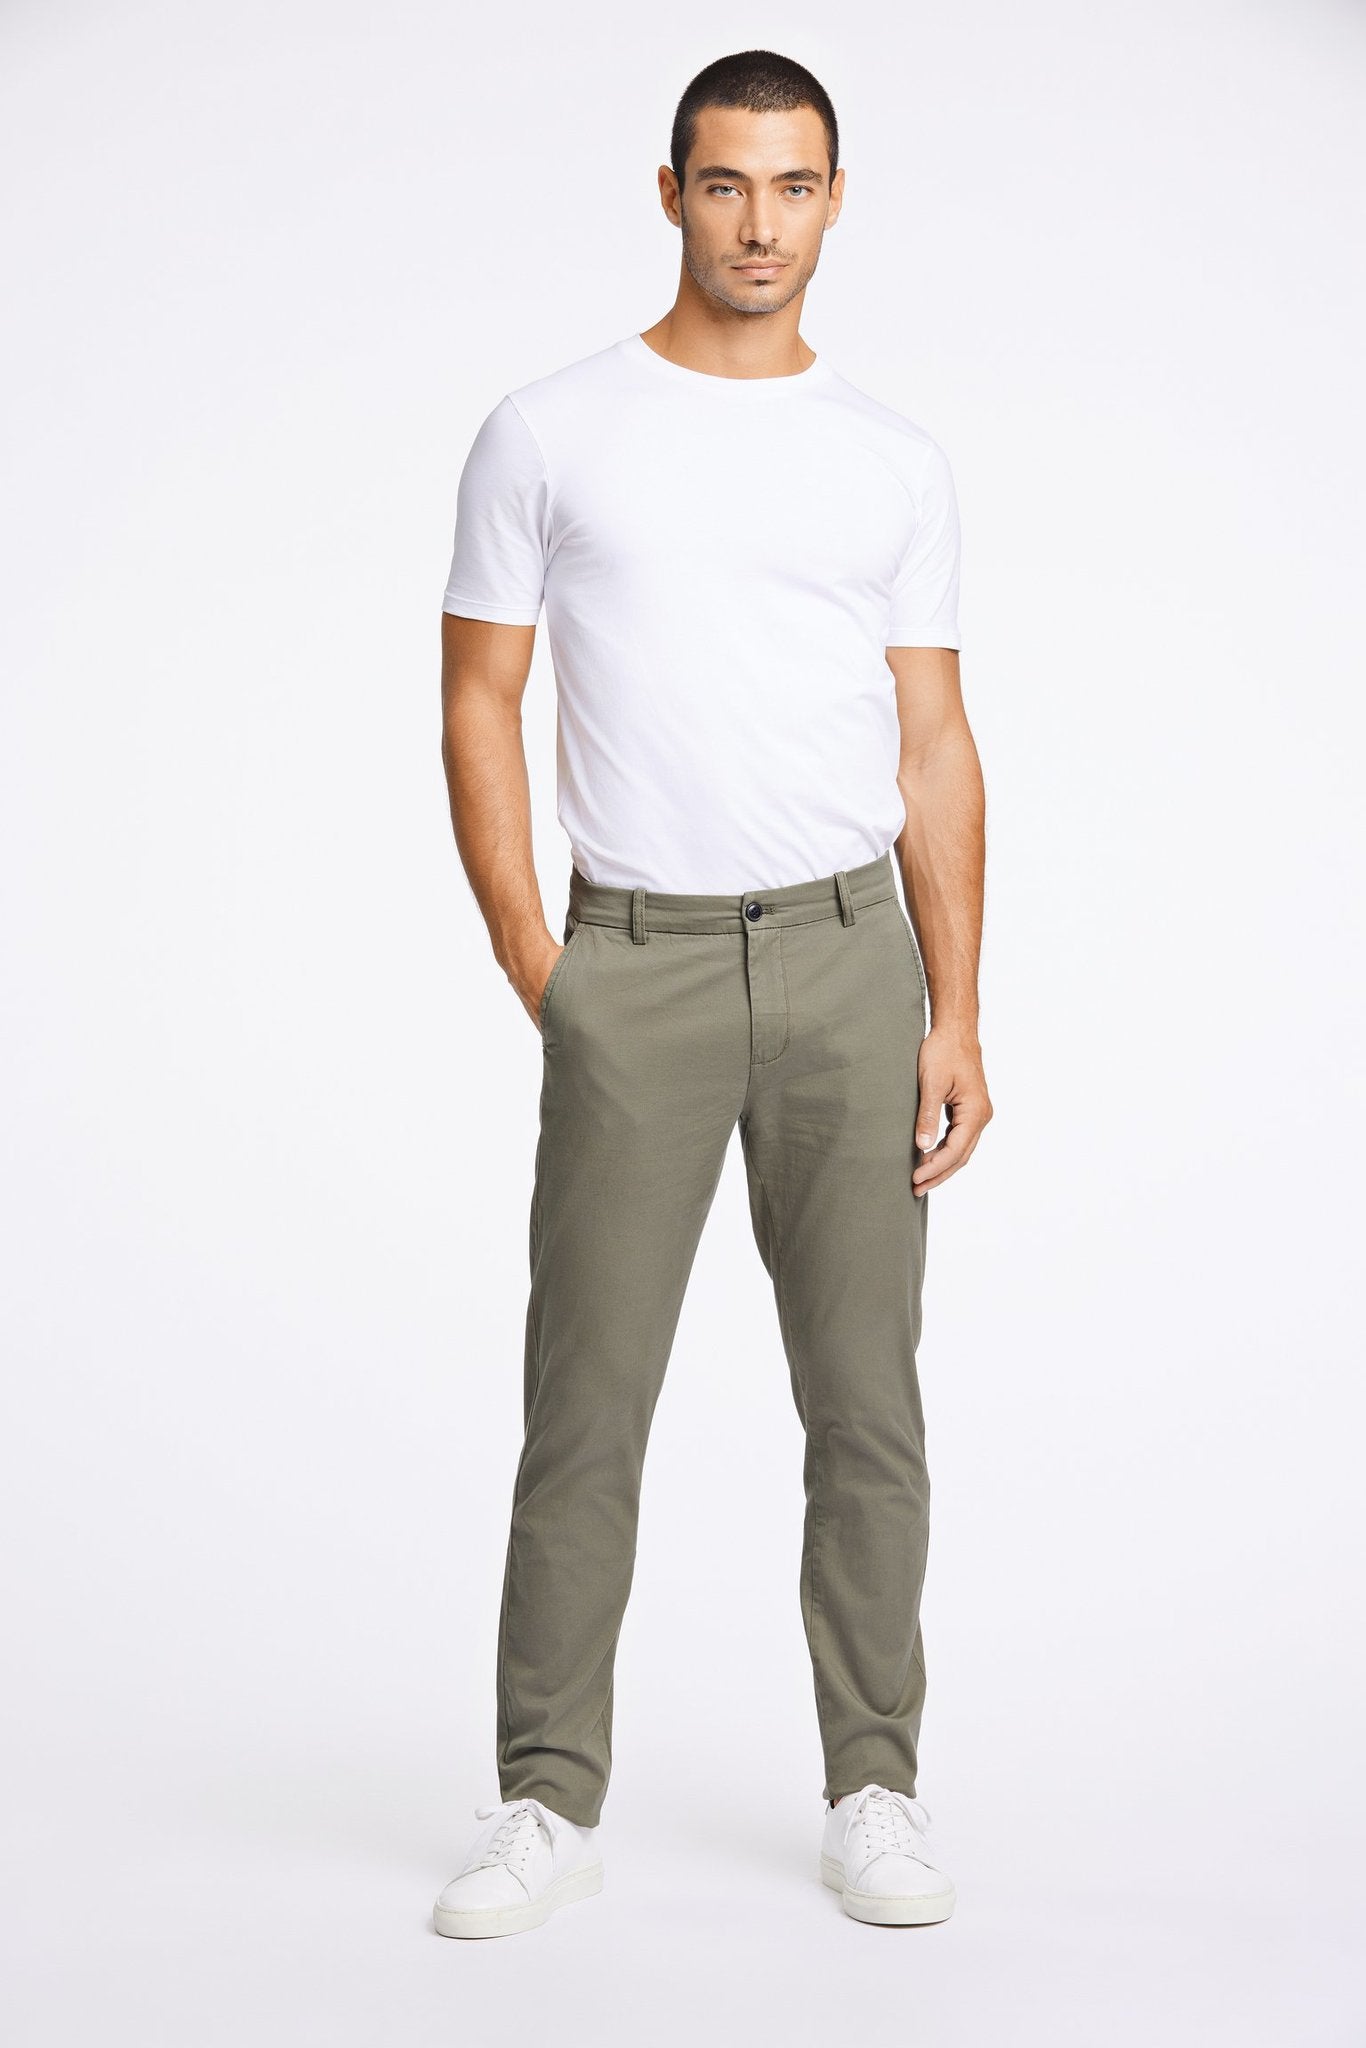 CHINOS DK ARMY